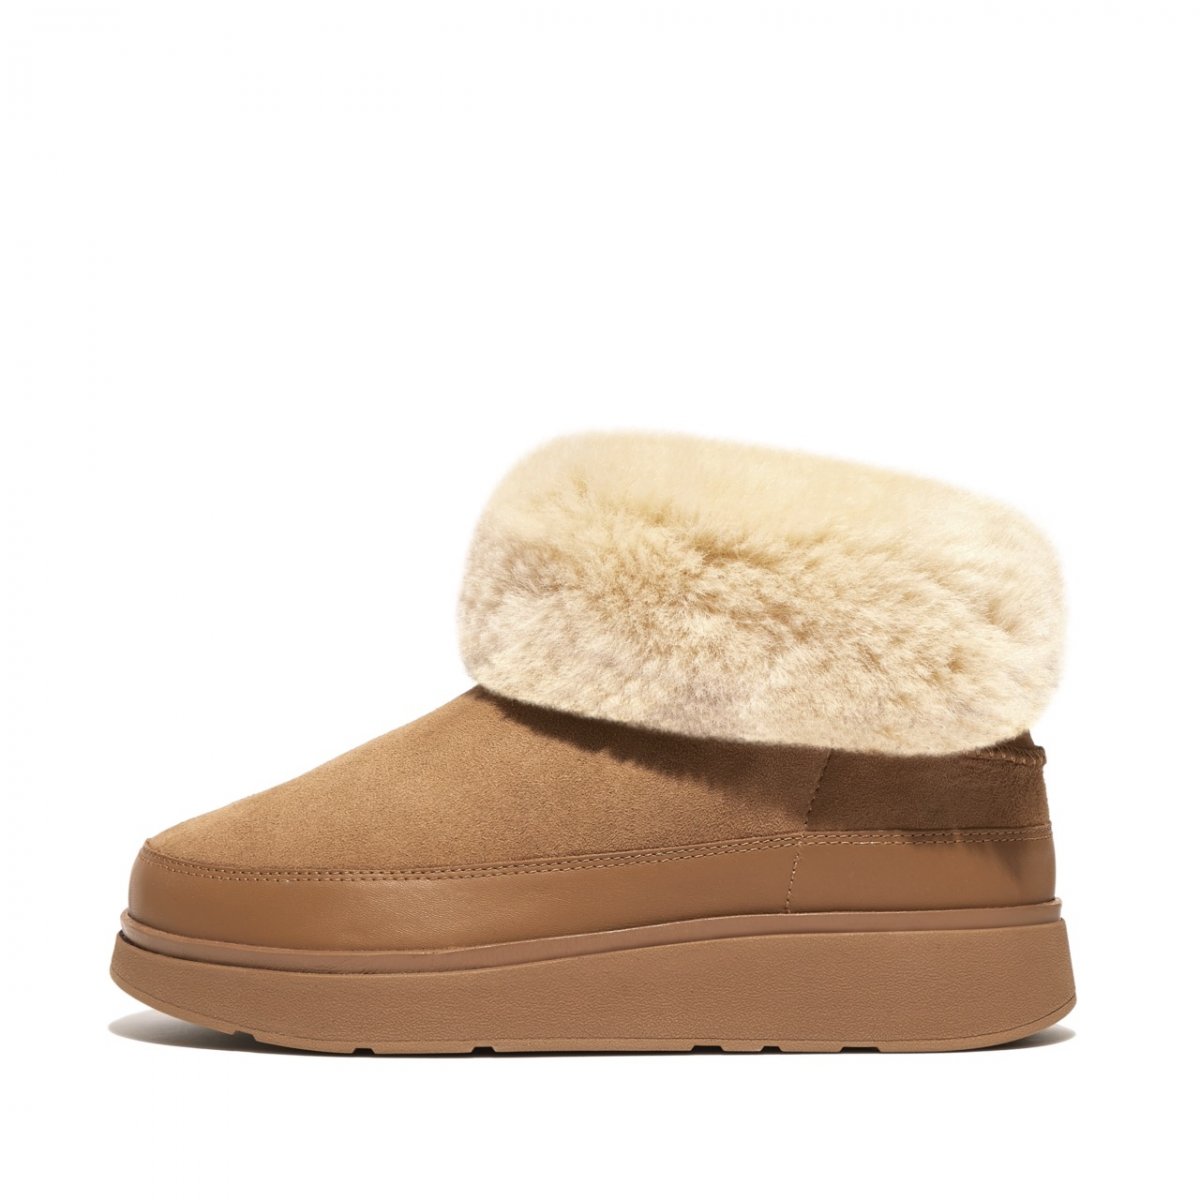 FitFlop GEN-FF Mini Double-Faced Shearling Boots Brązowy 36.5